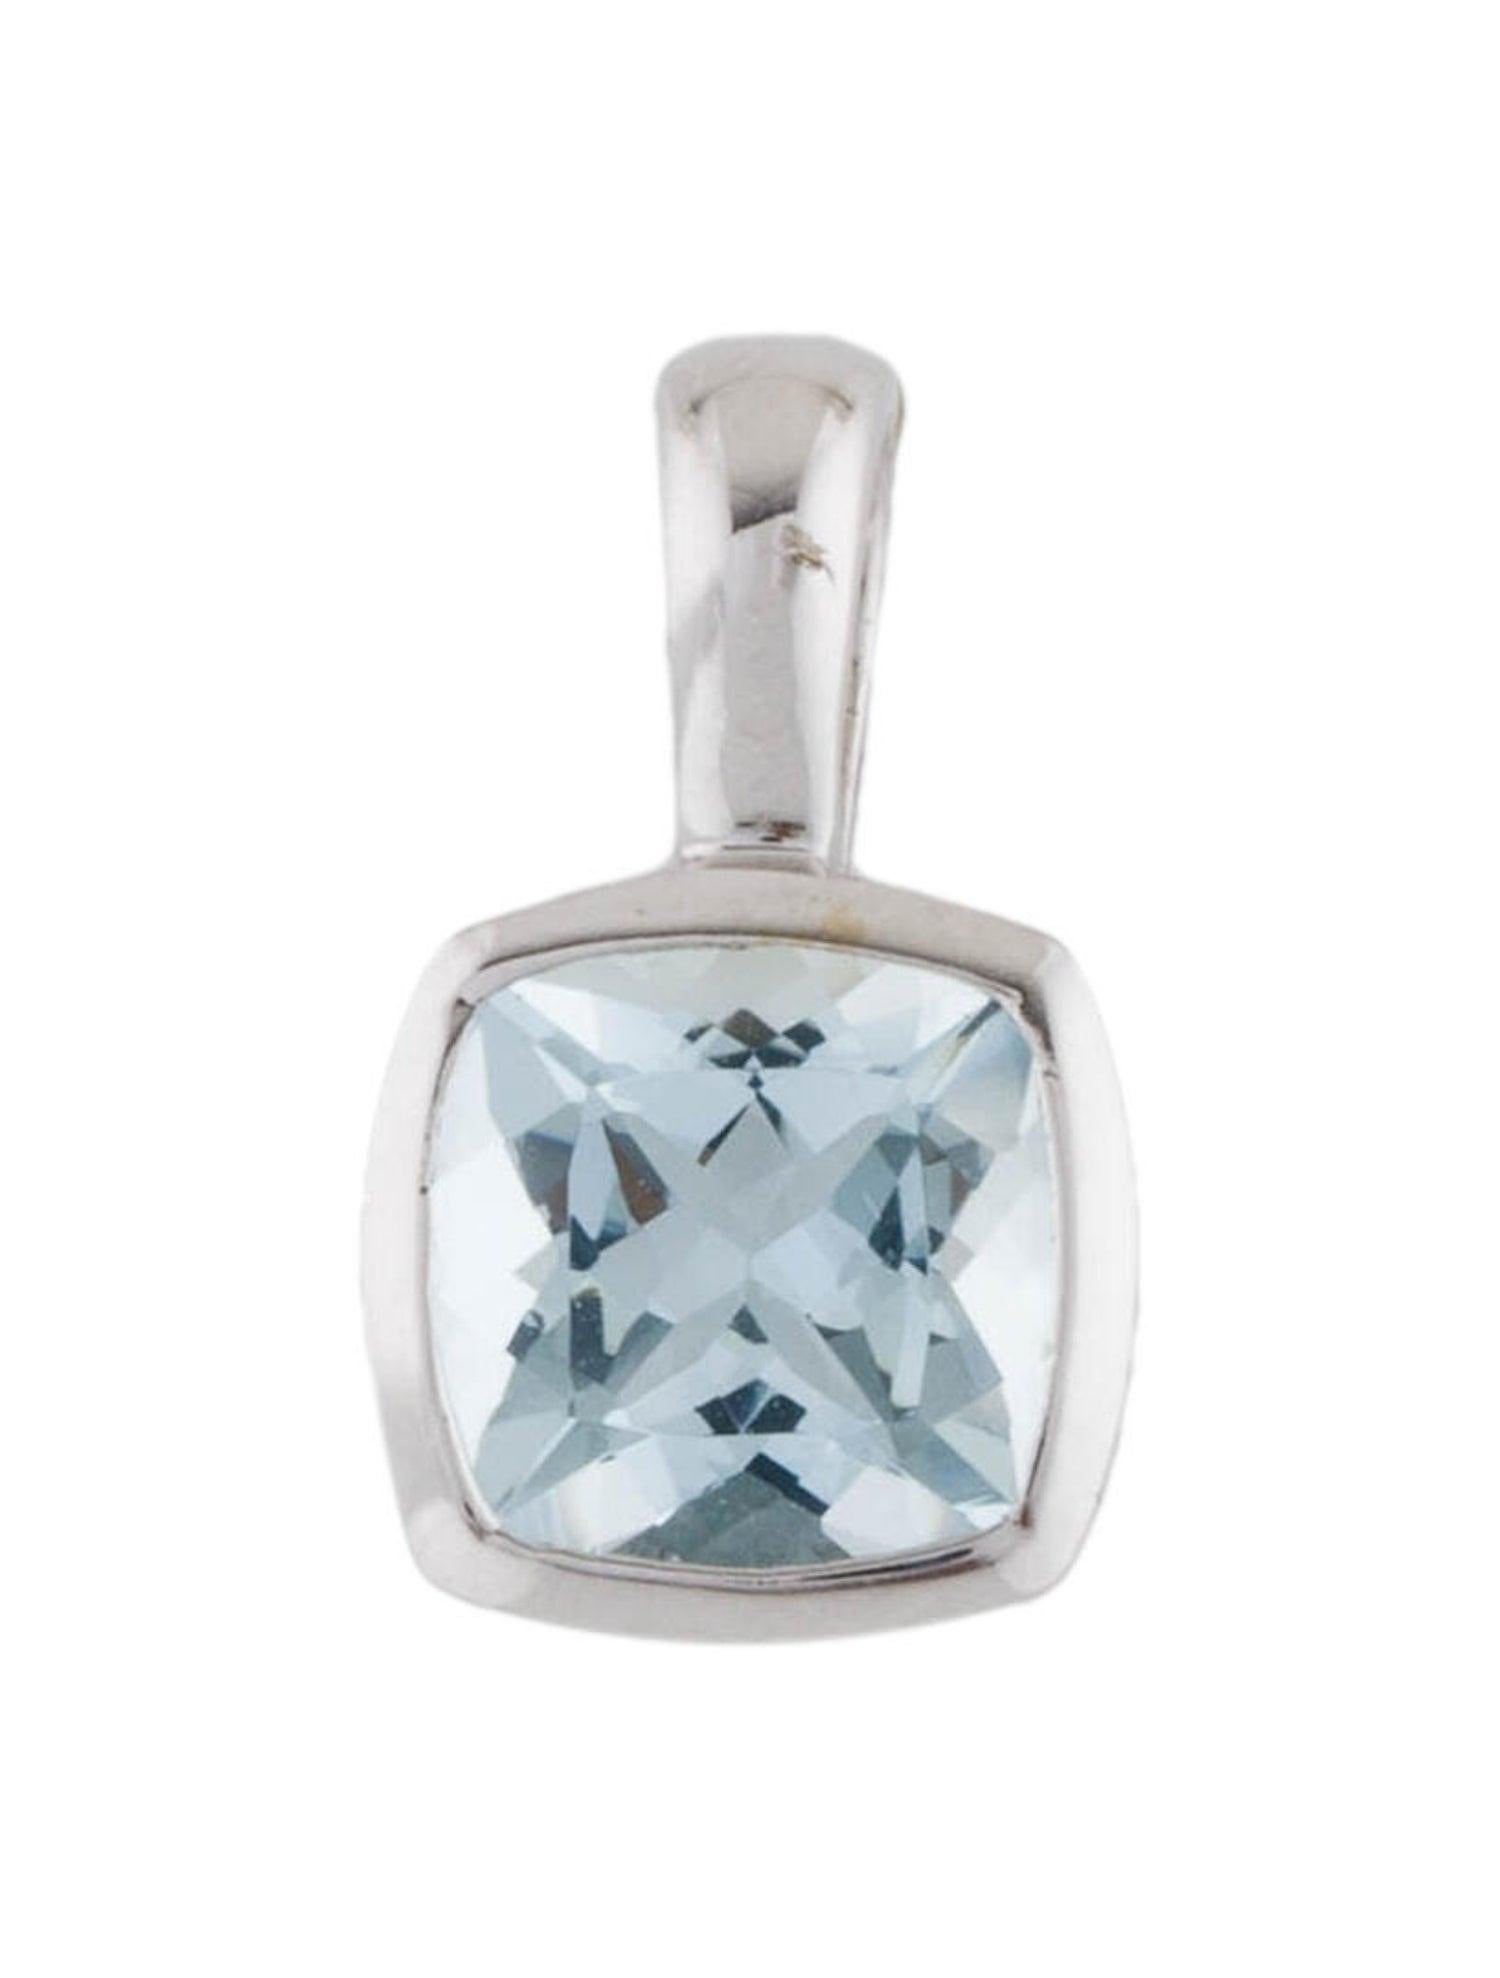 14K 1.53ct Aquamarine Pendant - Elegant & Timeless Gemstone Statement Jewelry In New Condition For Sale In Holtsville, NY